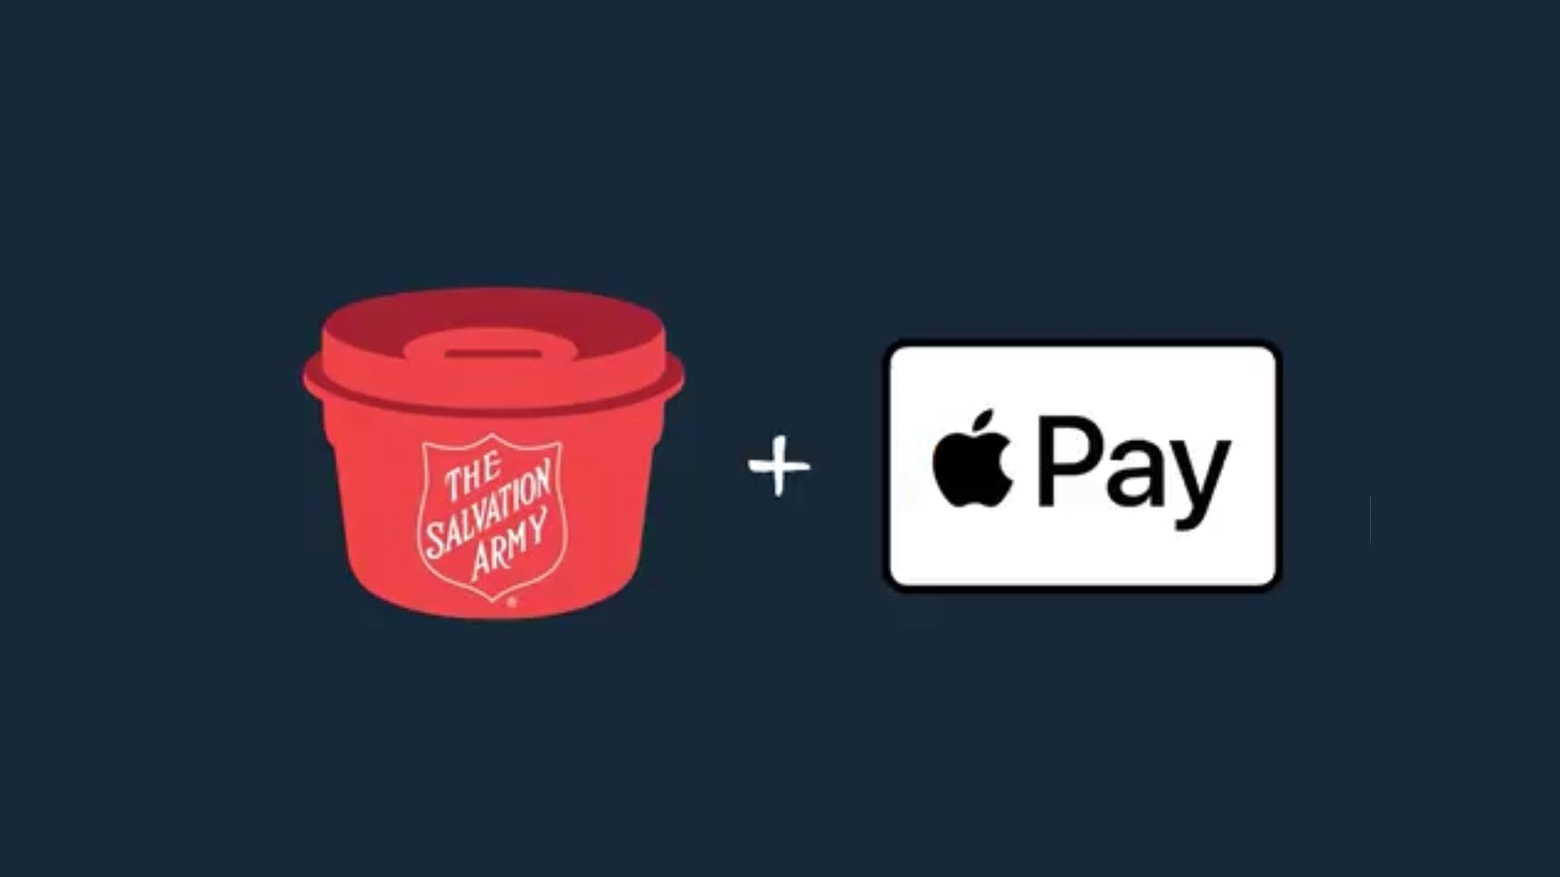 You don’t need cash to donate to the Salvation Army.